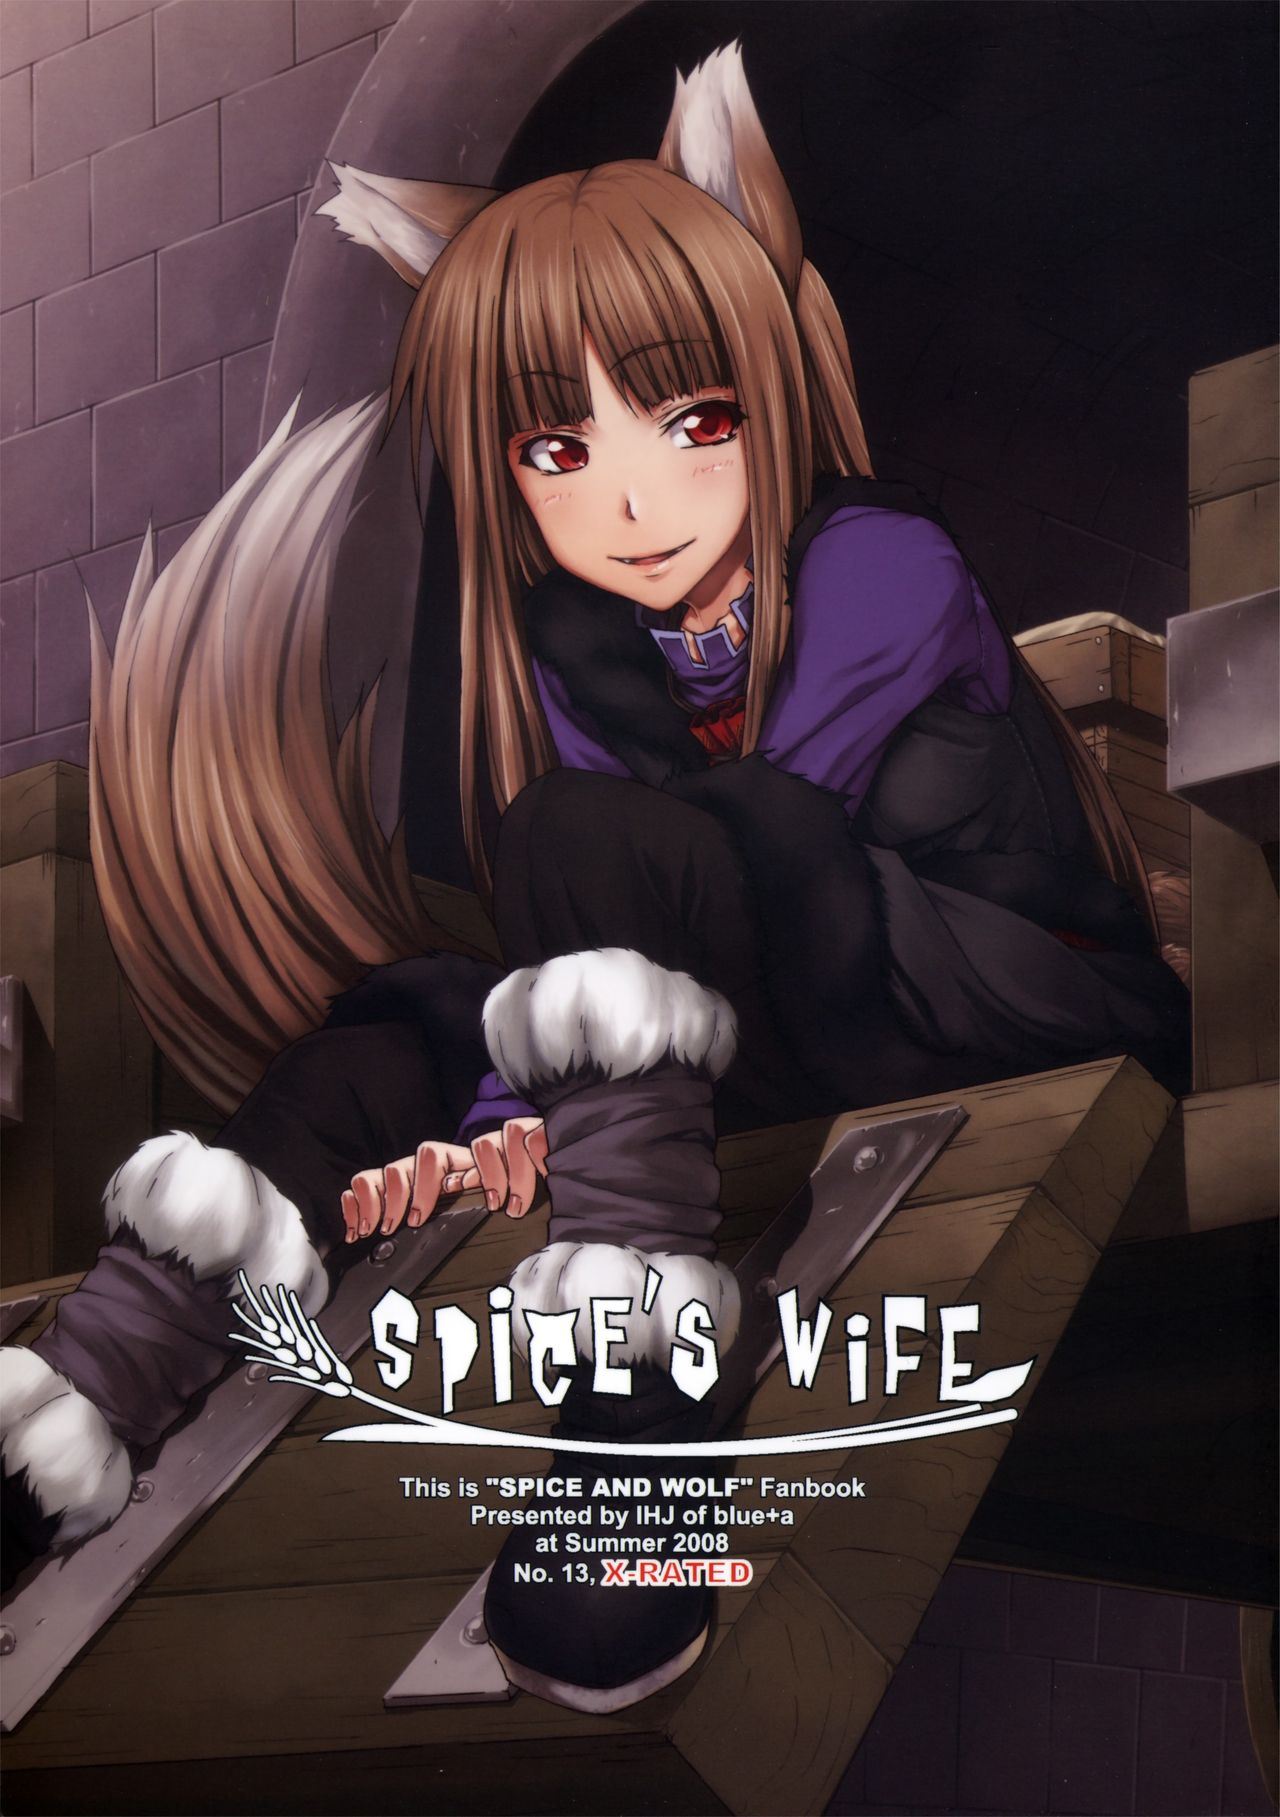 C74 blue Ifuji Shinsen SPiCES WiFE Spice and Wolf English xenex trans 00